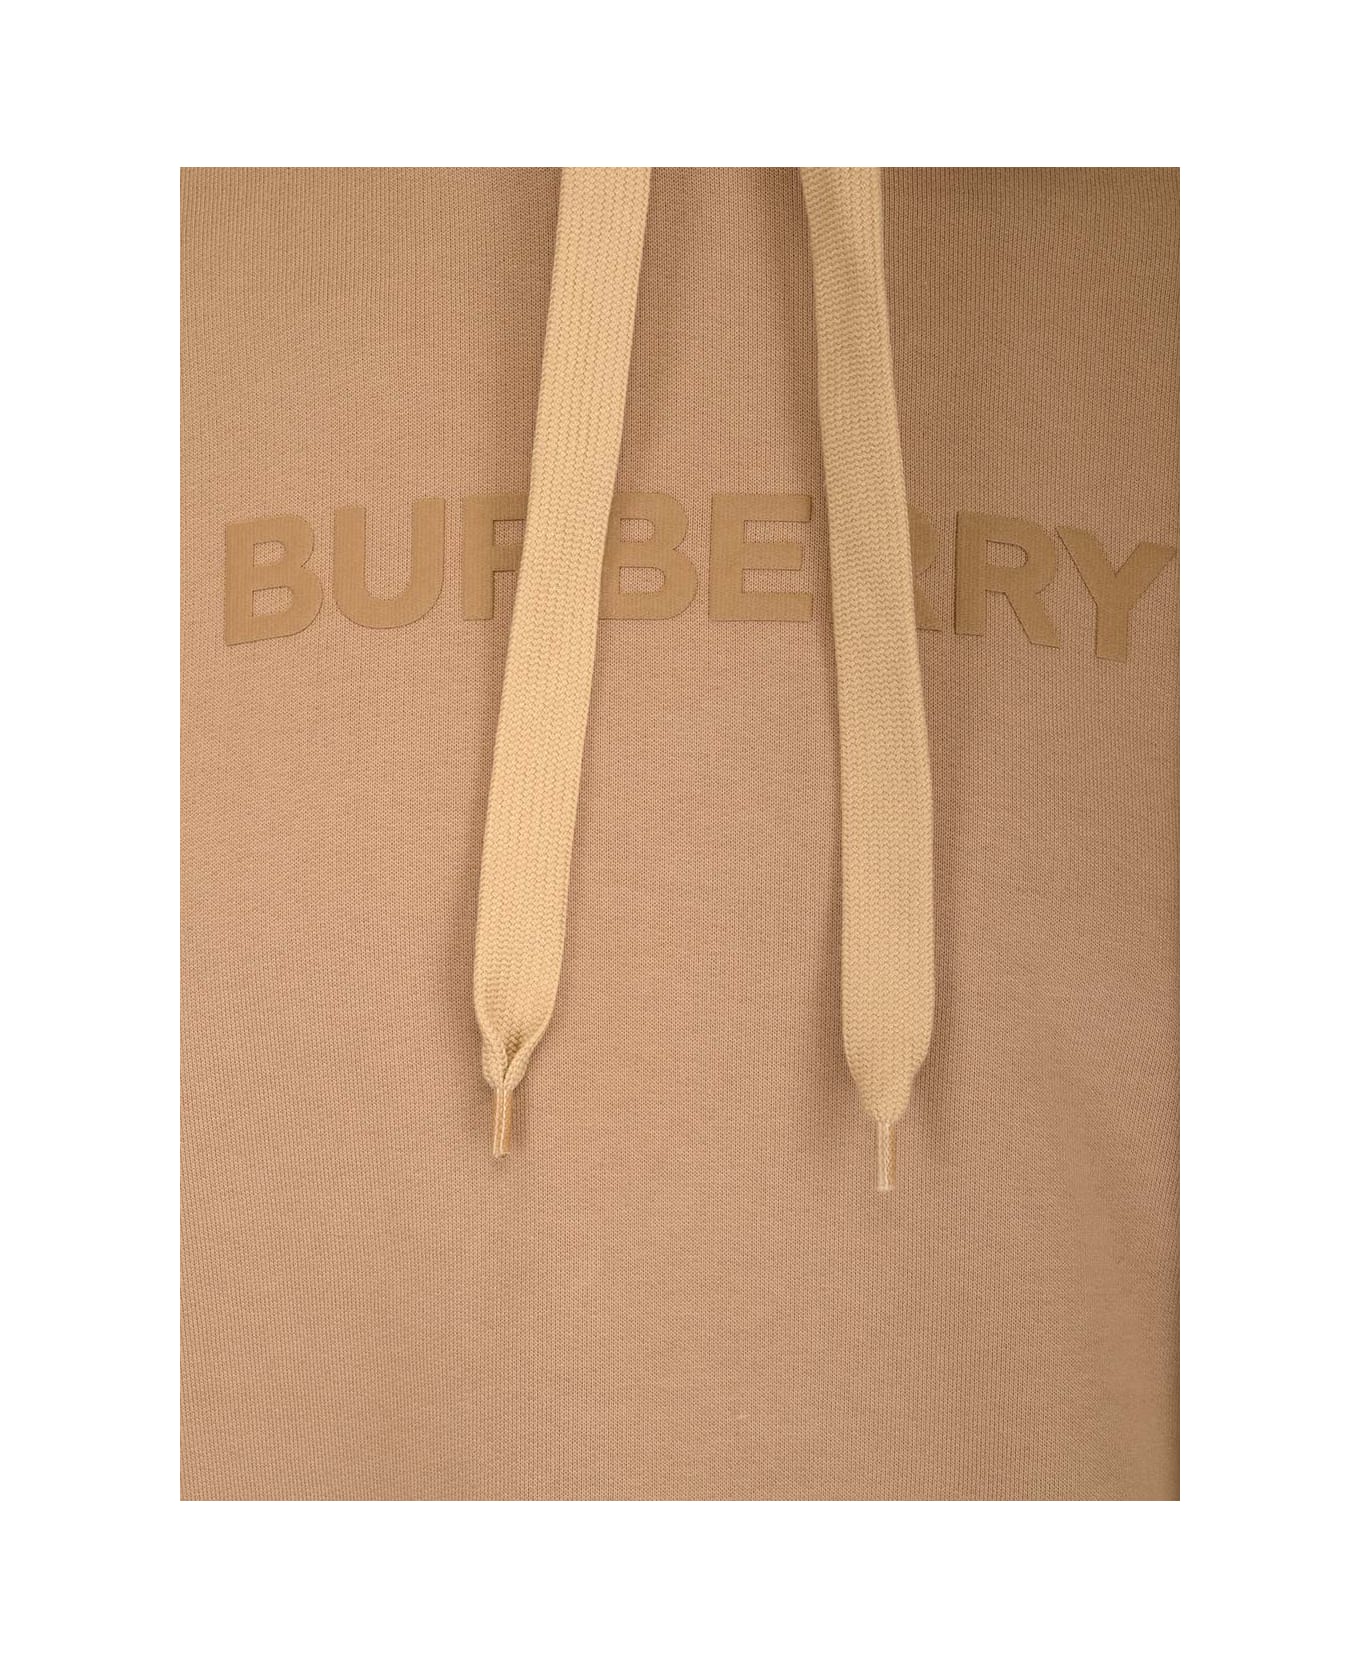 Burberry Camel Colored Cotton Hoodie - Brown